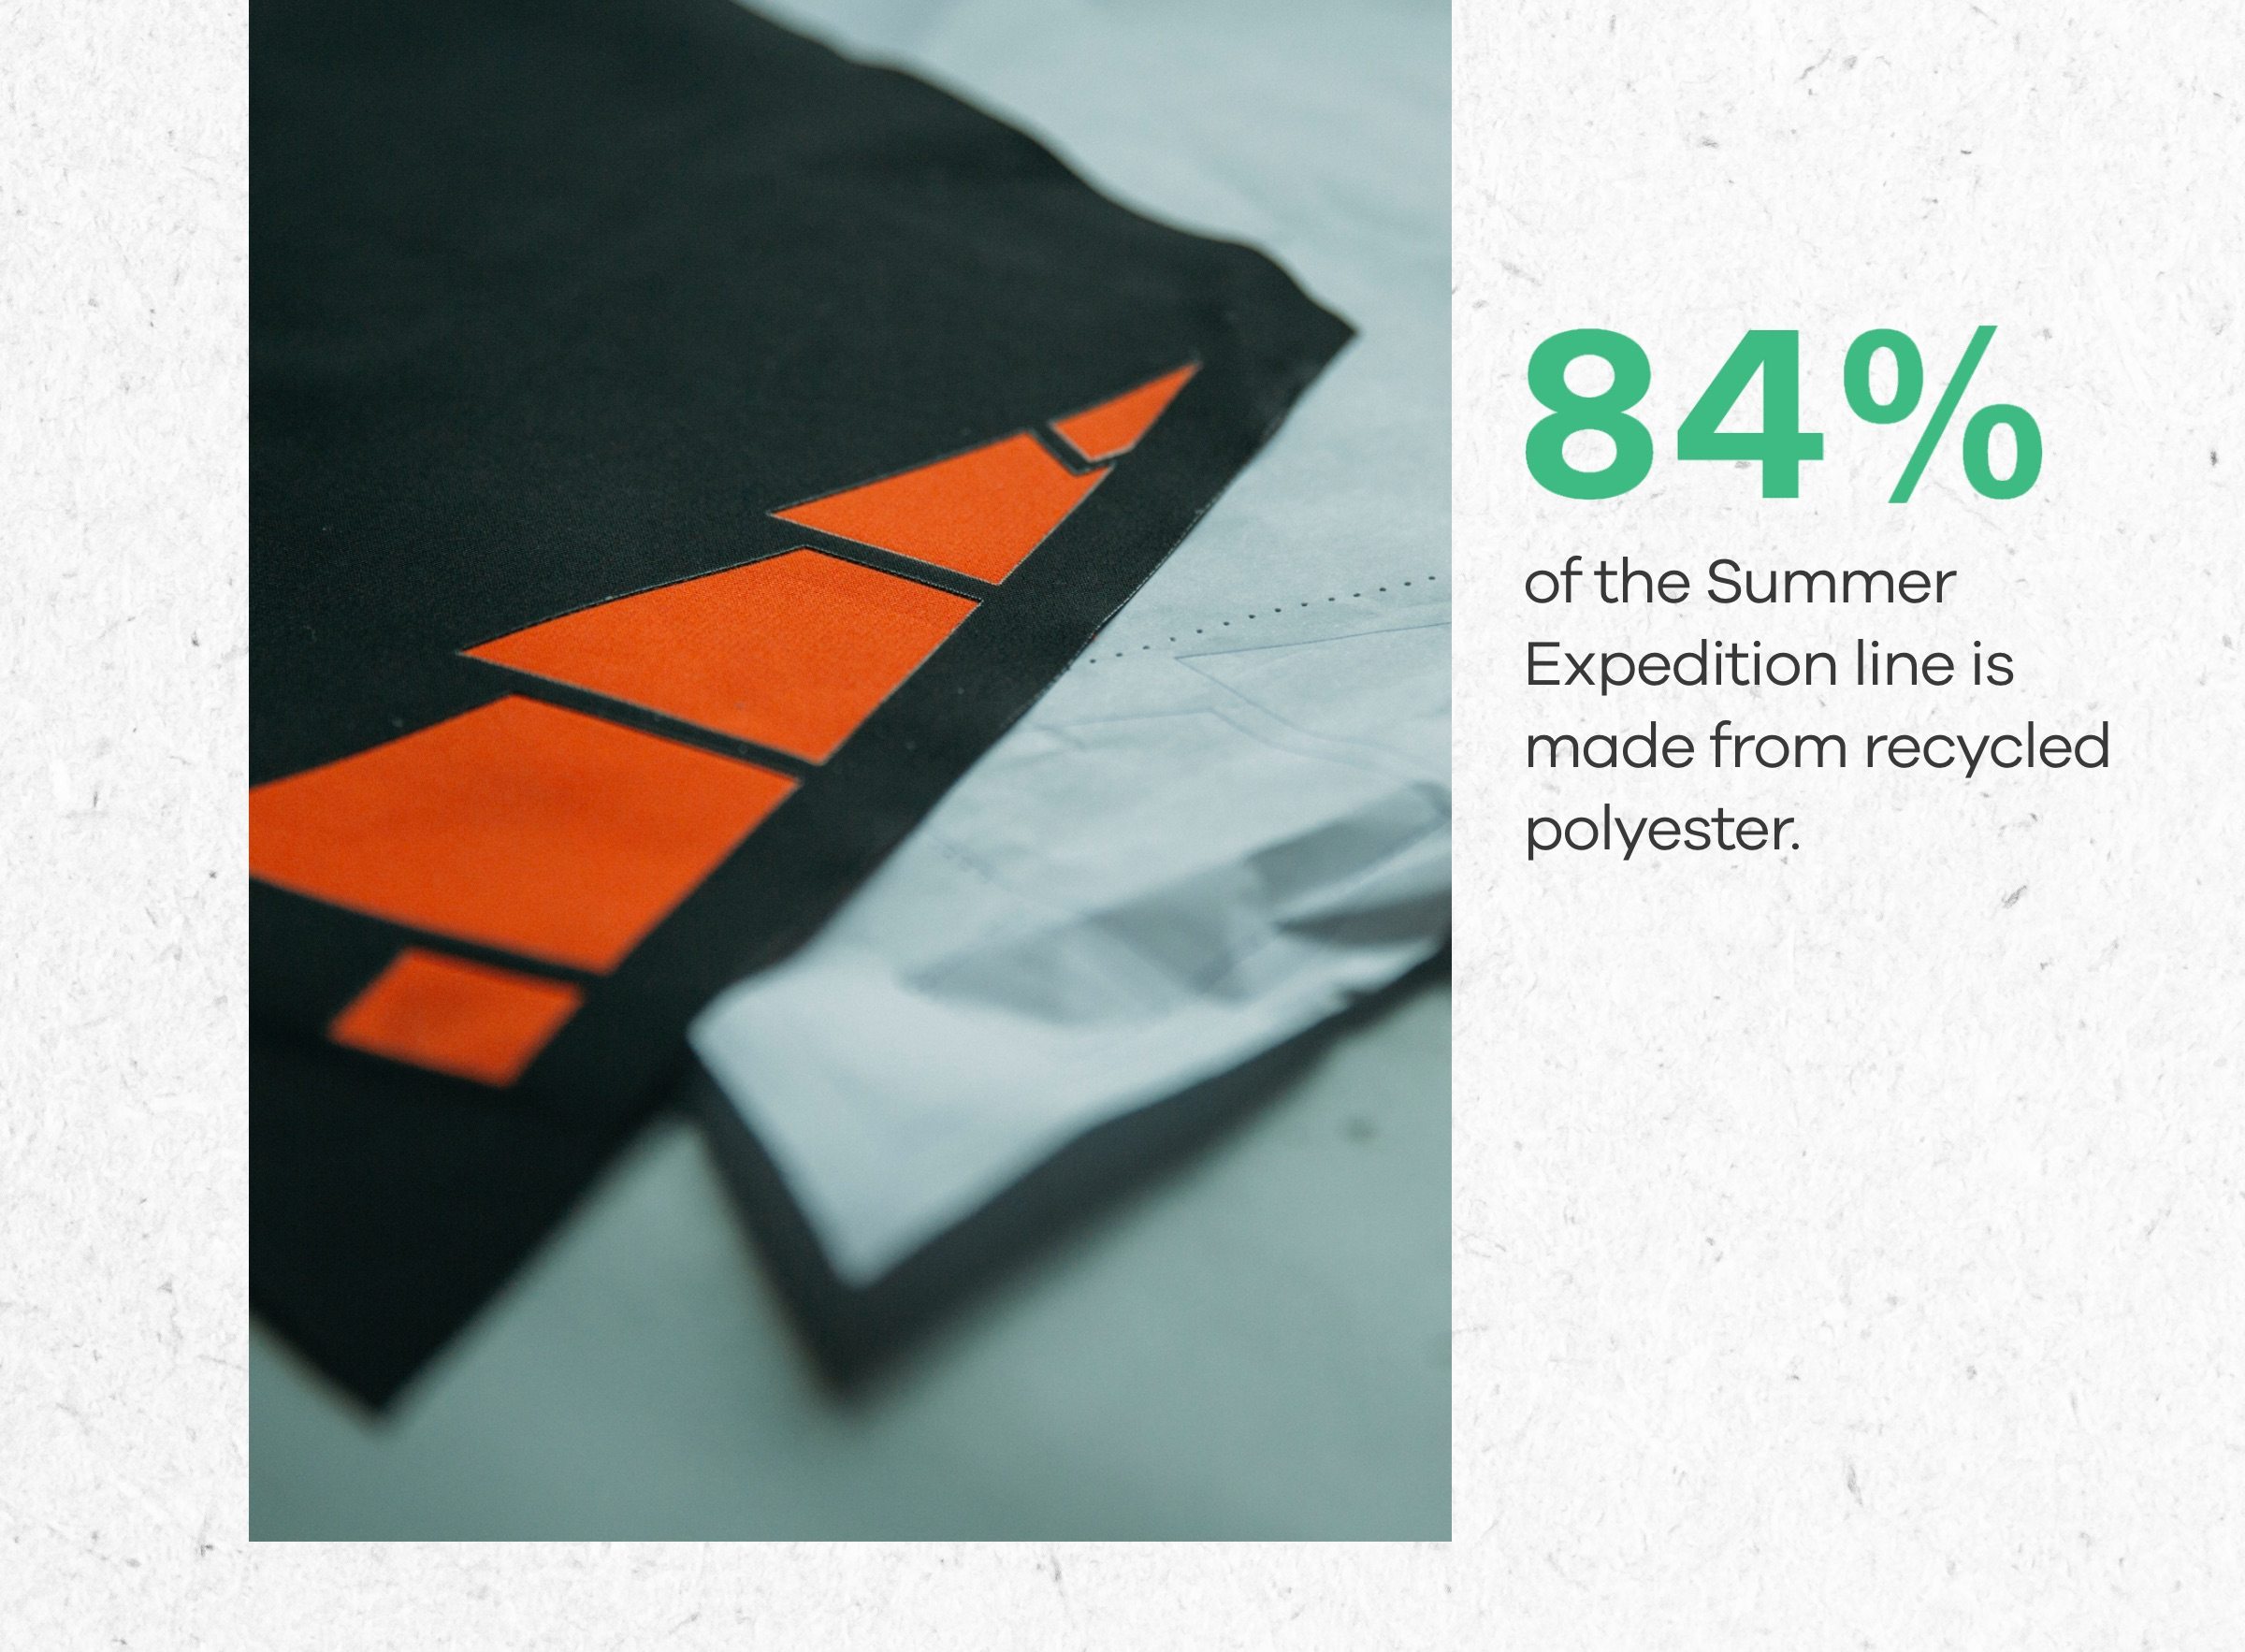 84% of the Summer Expedition line is made from recycled polyester